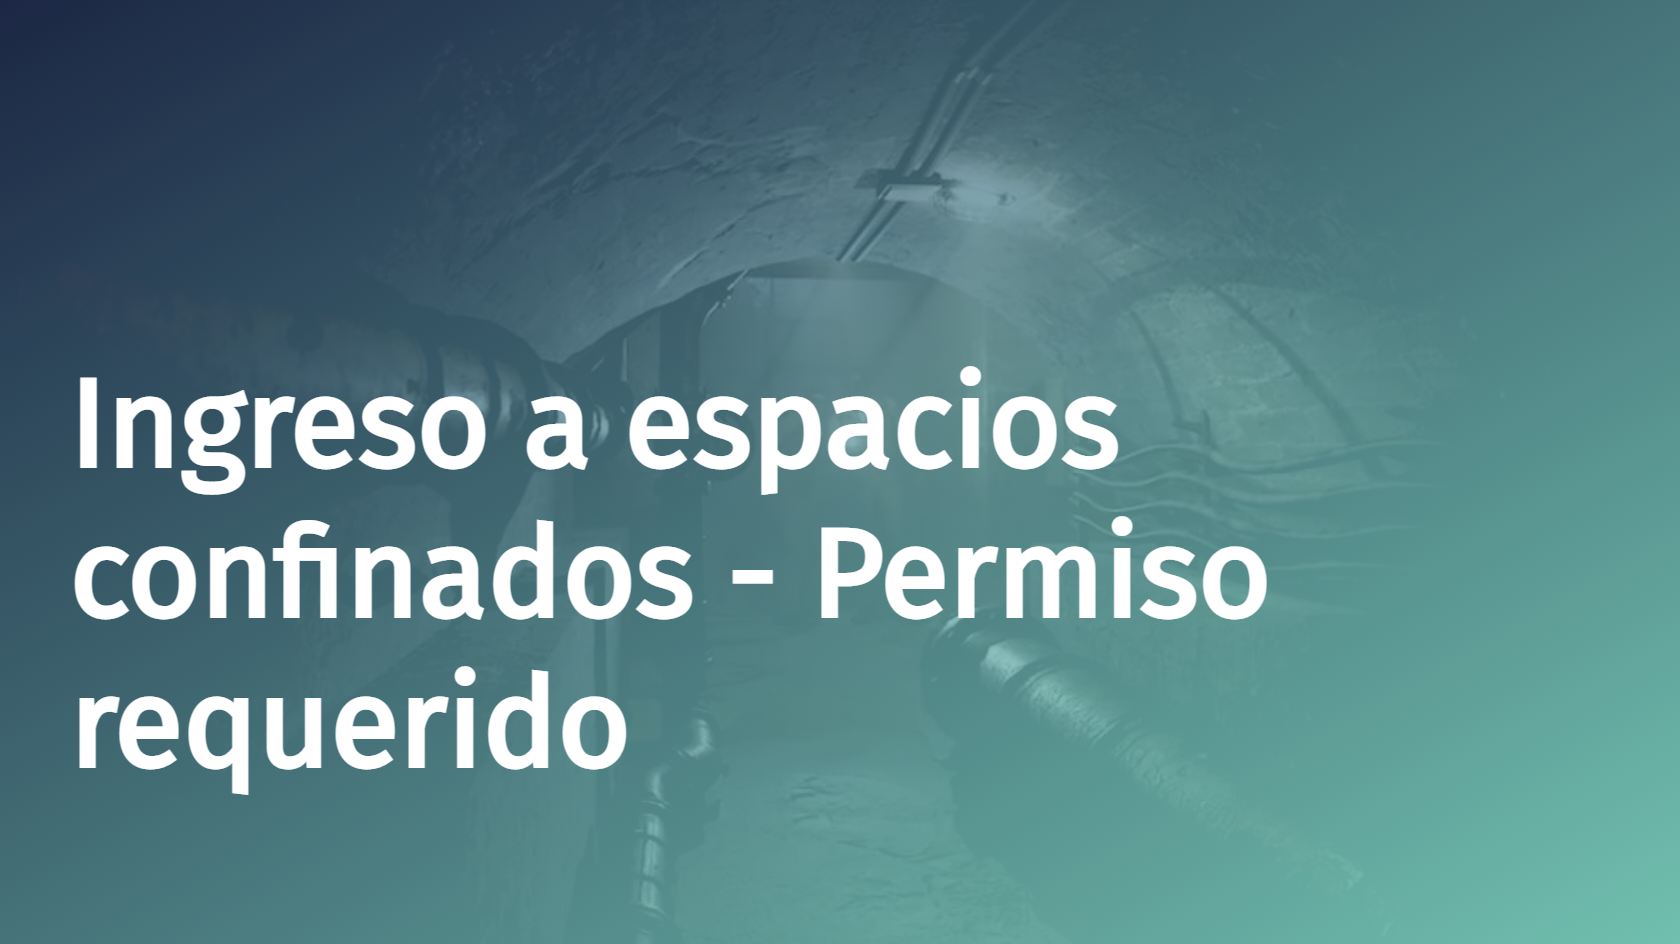 Spanish - Confined Space Entry - Permit Required